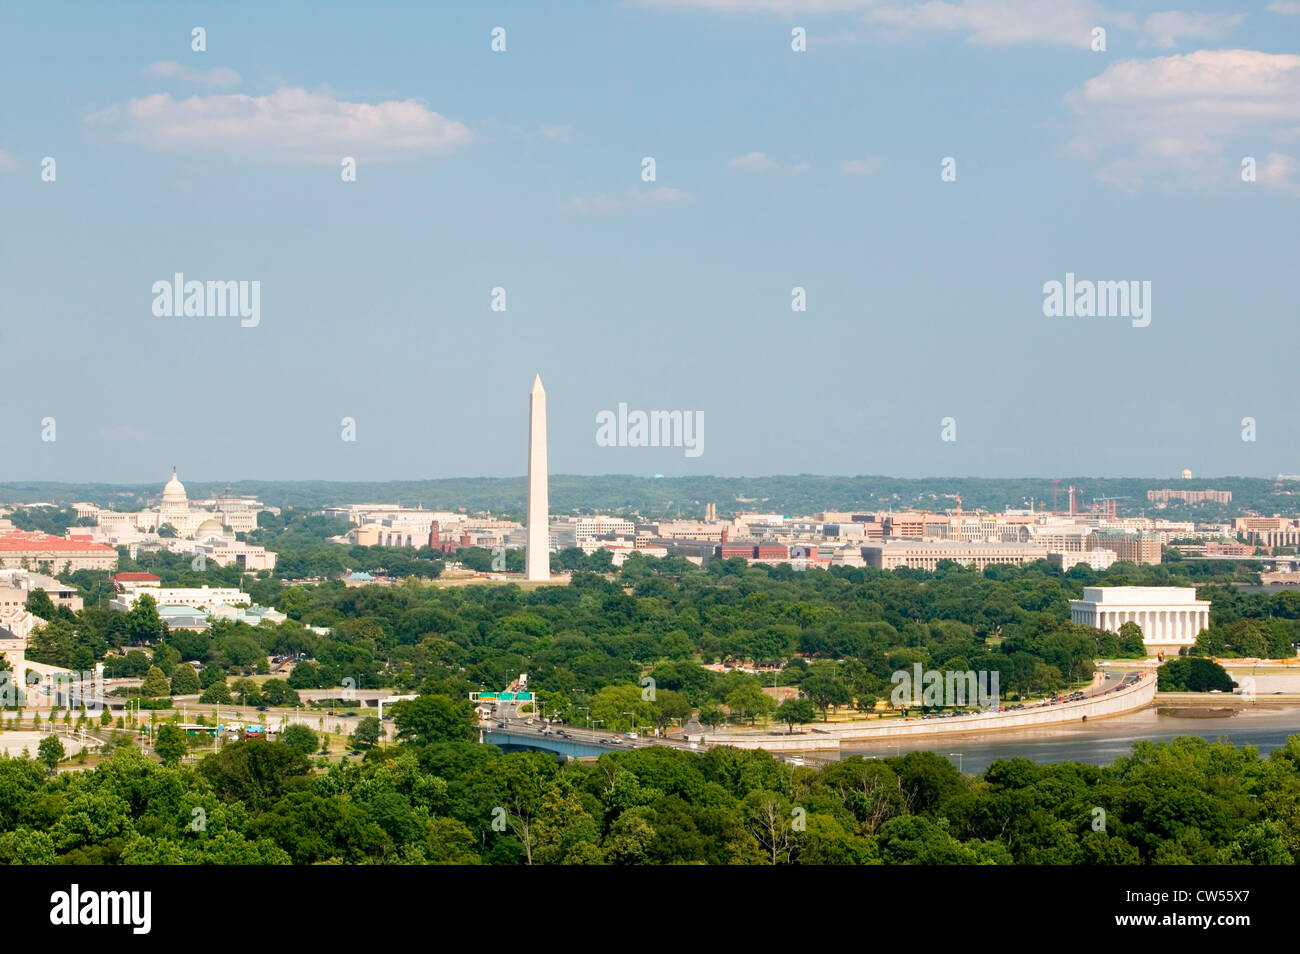 Washington D.C. aerial view with US Capitol, Washington Monument, Lincoln Memorial and Potomac River Stock Photo